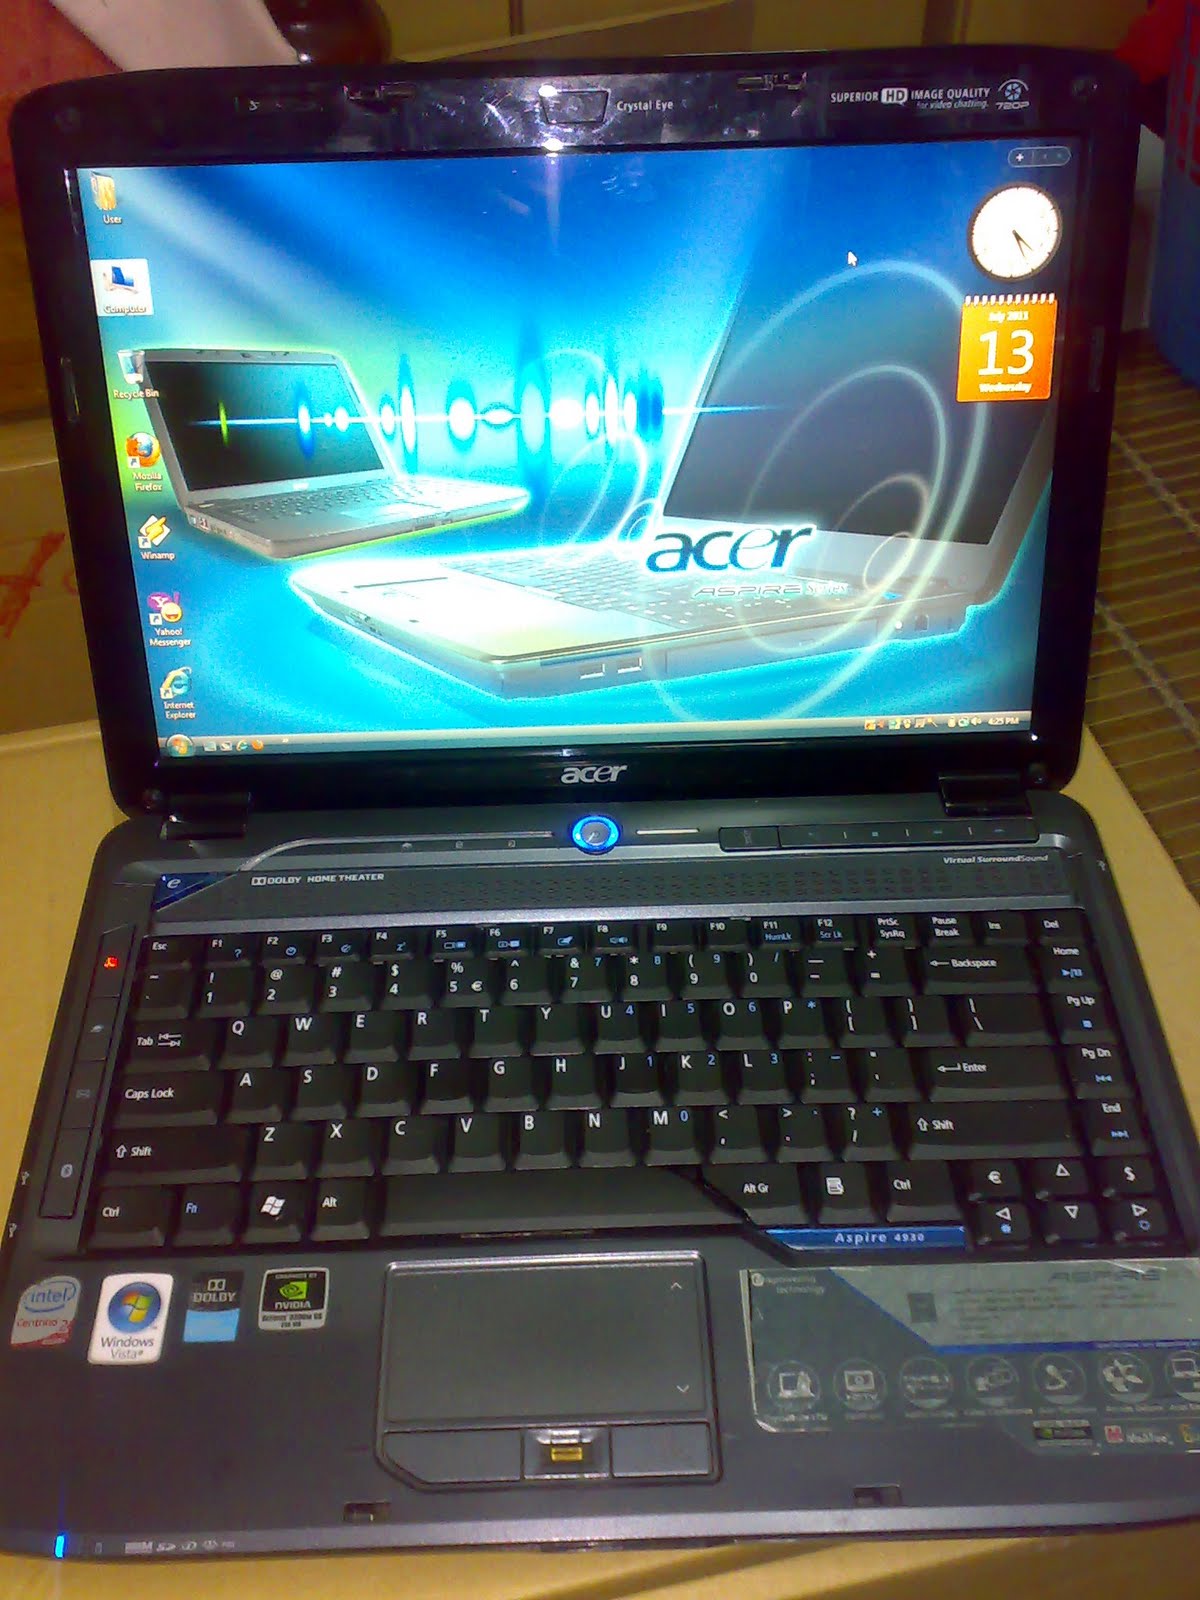 acer crystal eye web camera for windows 7 free download